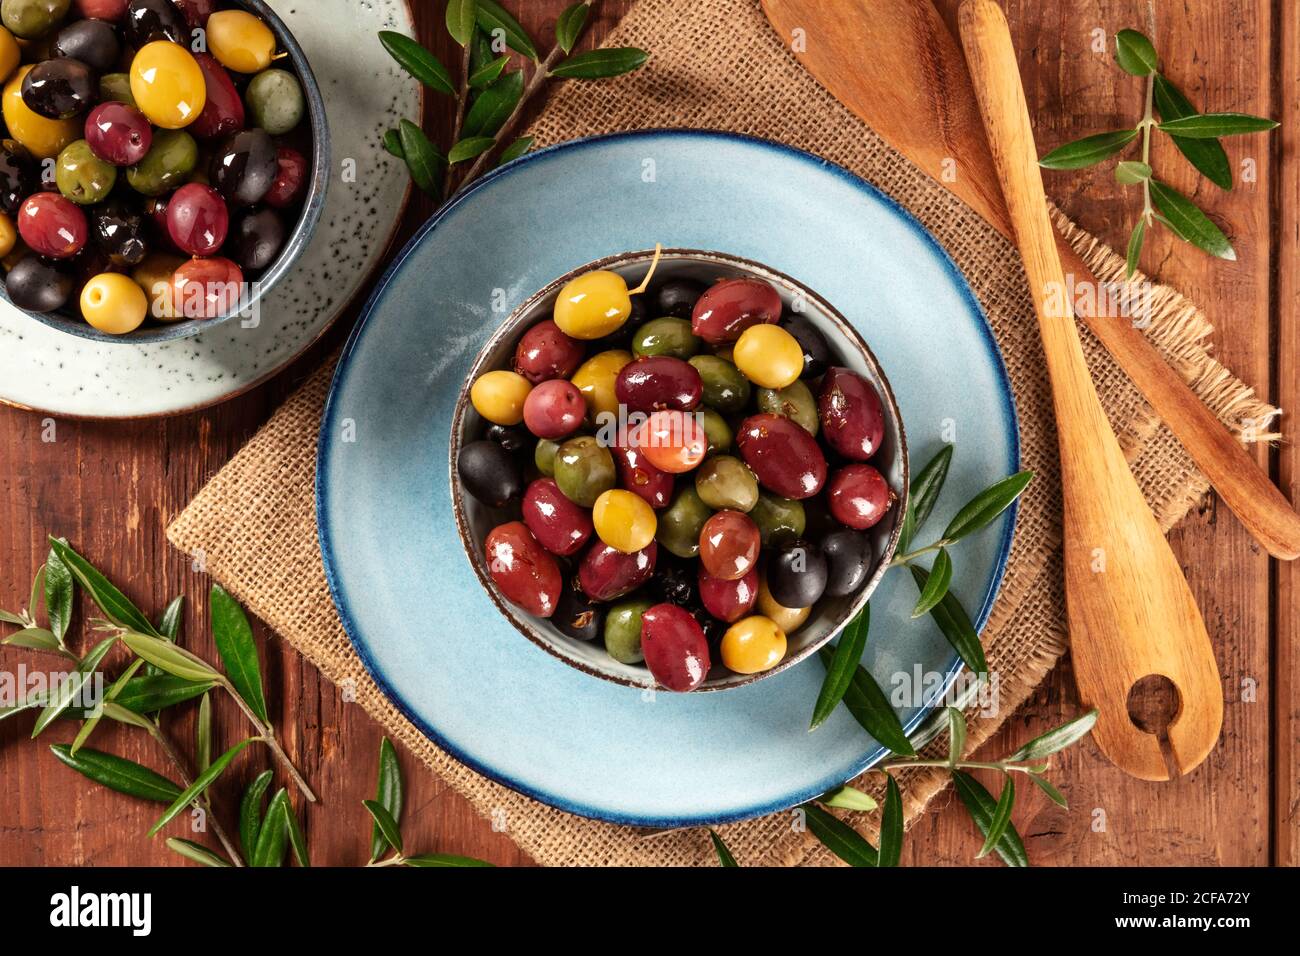 Olives. A variety of green, black and red olives, with leaves, shot from the top on a rustic wooden background Stock Photo